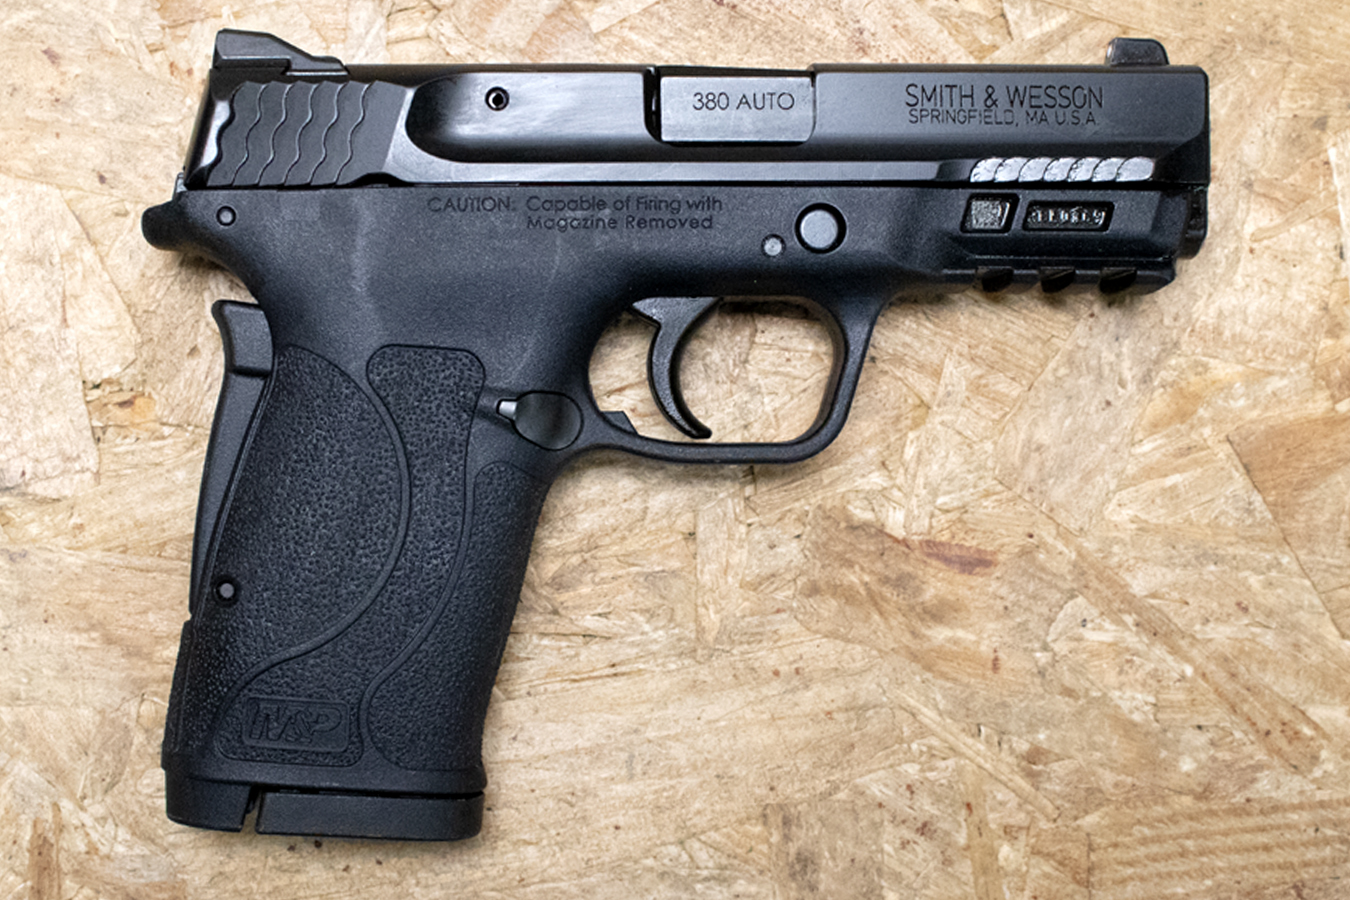 No. 17 Best Selling: SMITH AND WESSON MP380 SHIELD EZ 380 ACP PISTOL